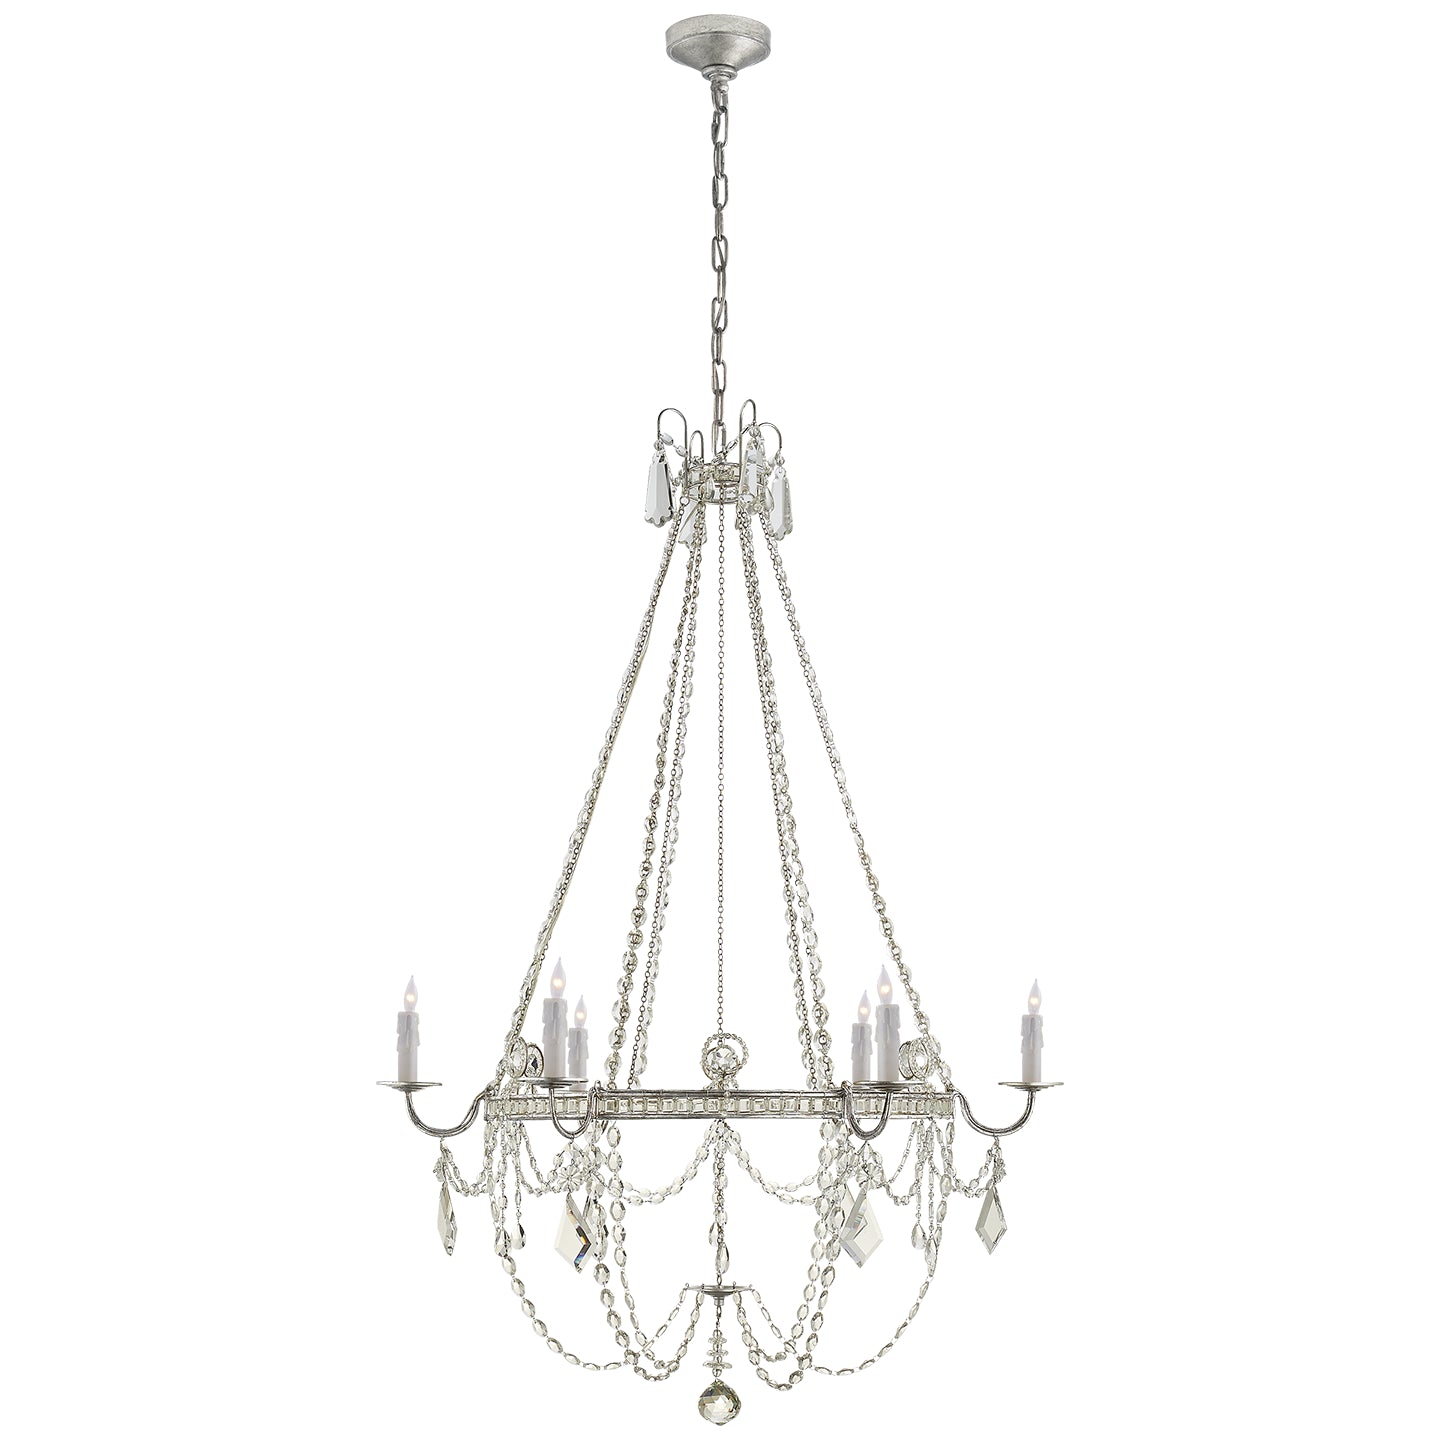 Load image into Gallery viewer, Visual Comfort Signature - SP 5031BSL-CG - Six Light Chandelier - Sharon - Burnished Silver Leaf
